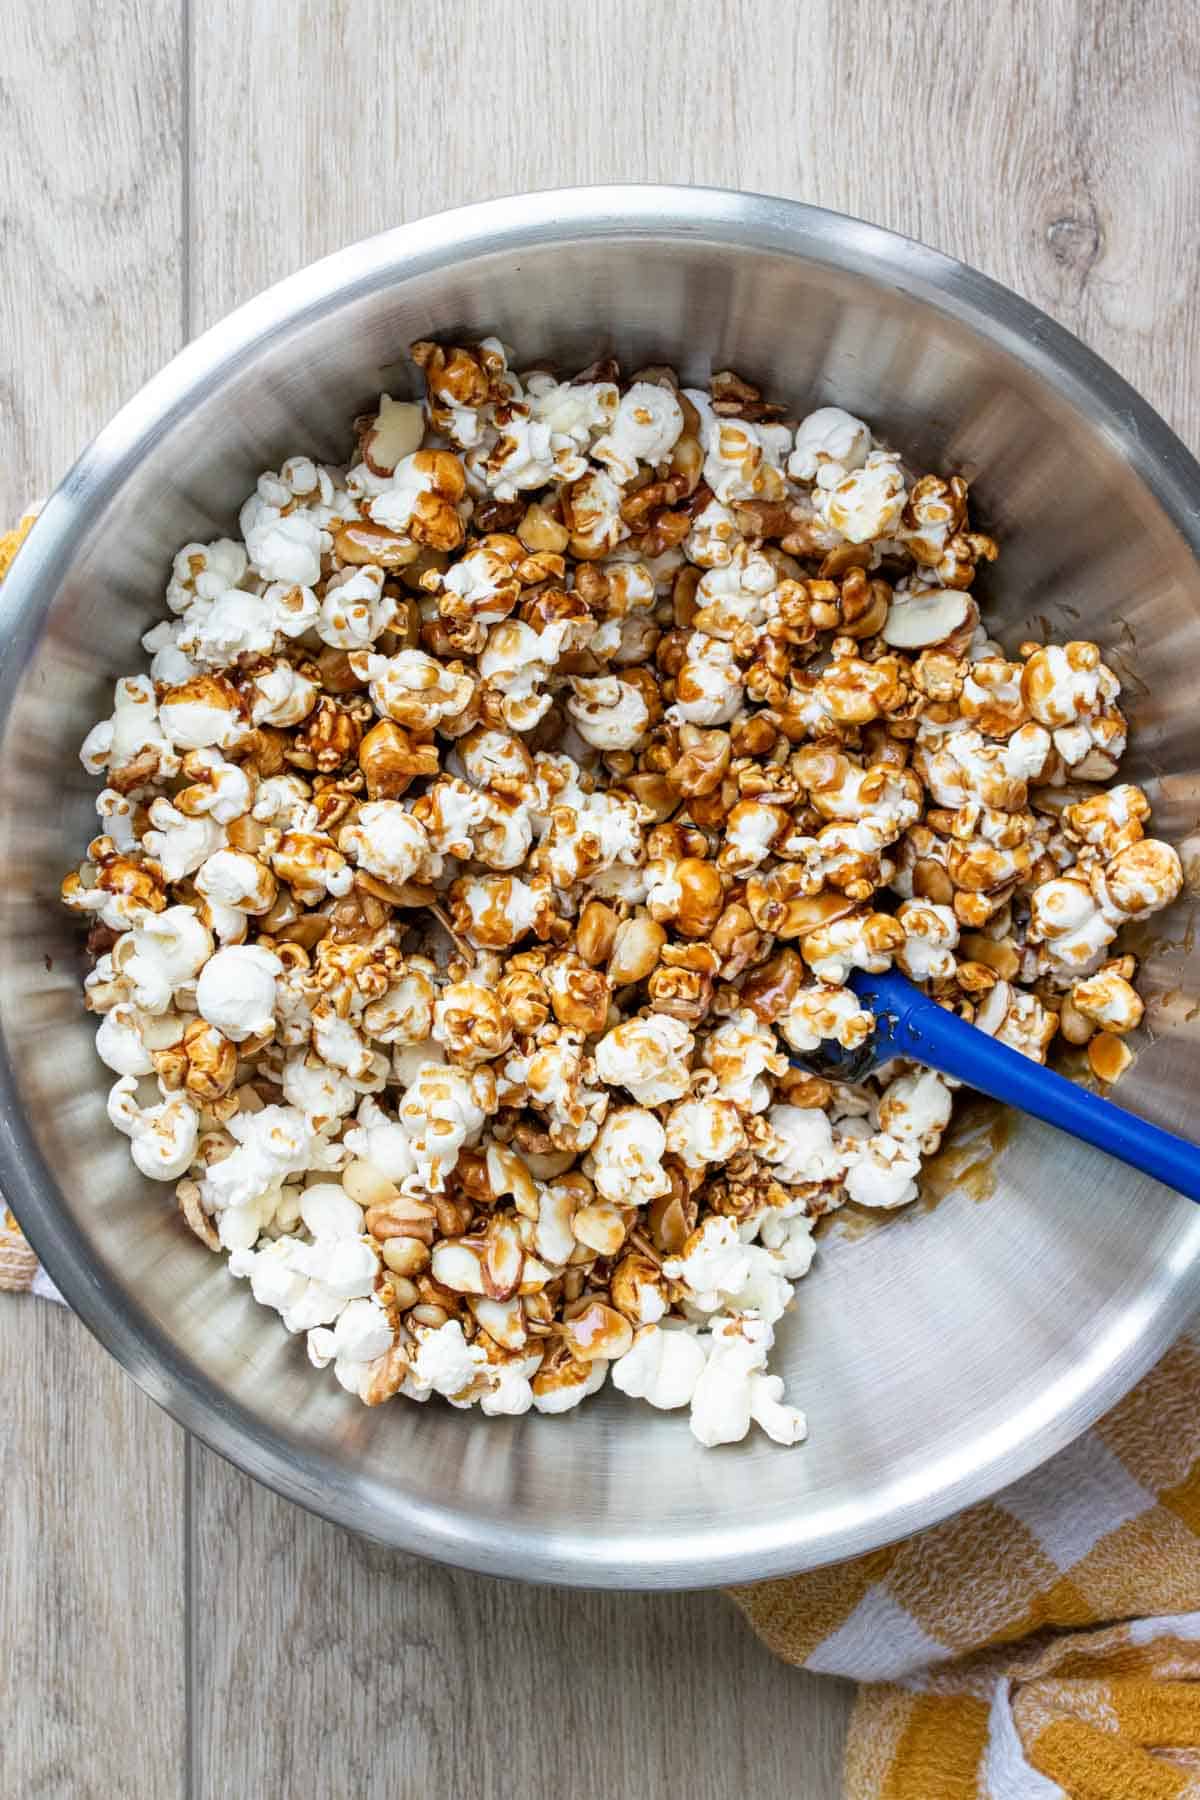 A metal bowl with popcorn being mixed with caramel by a blue spatula